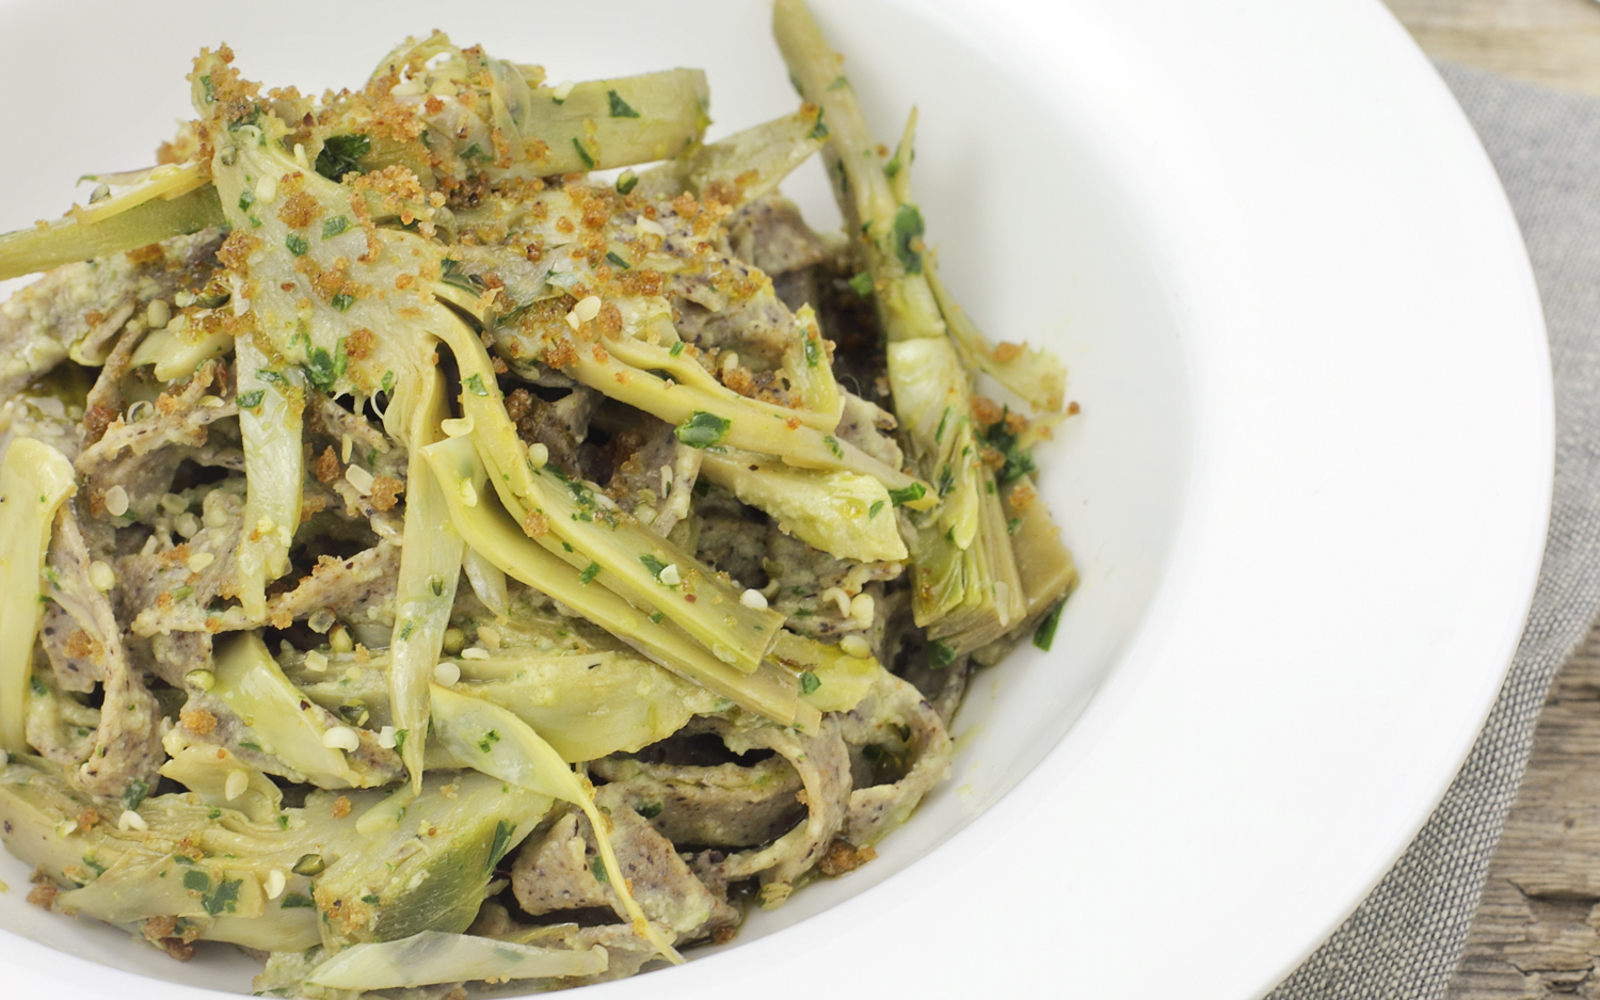 Hemp Pasta With Artichokes and Bread Crumbs